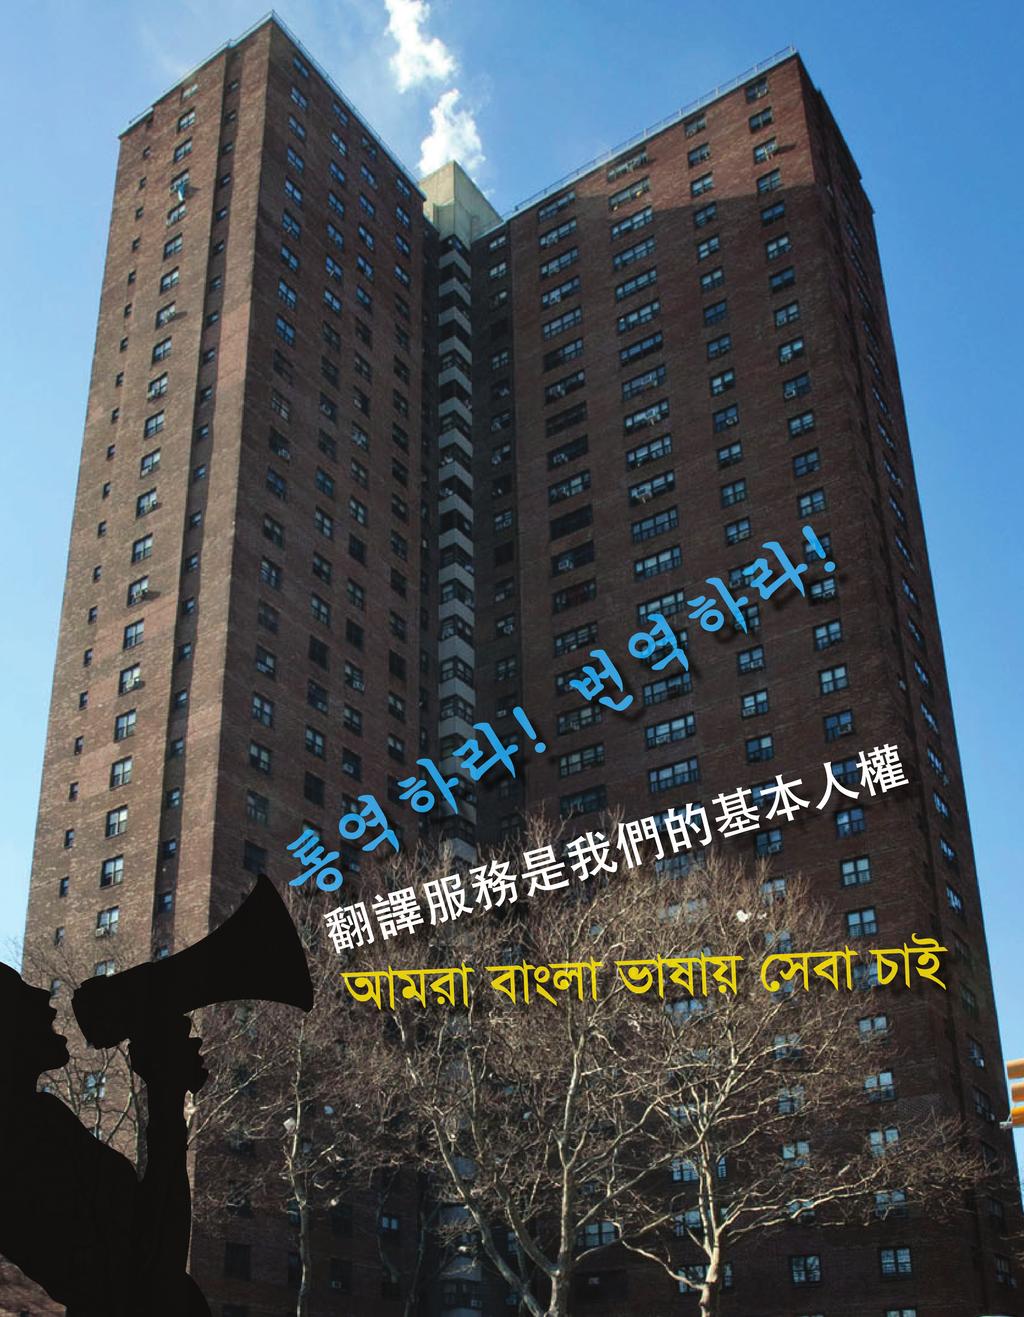 No Access The Need for Improved Language Assistance Services for Limited English Proficient Asian Tenants of the New York City Housing